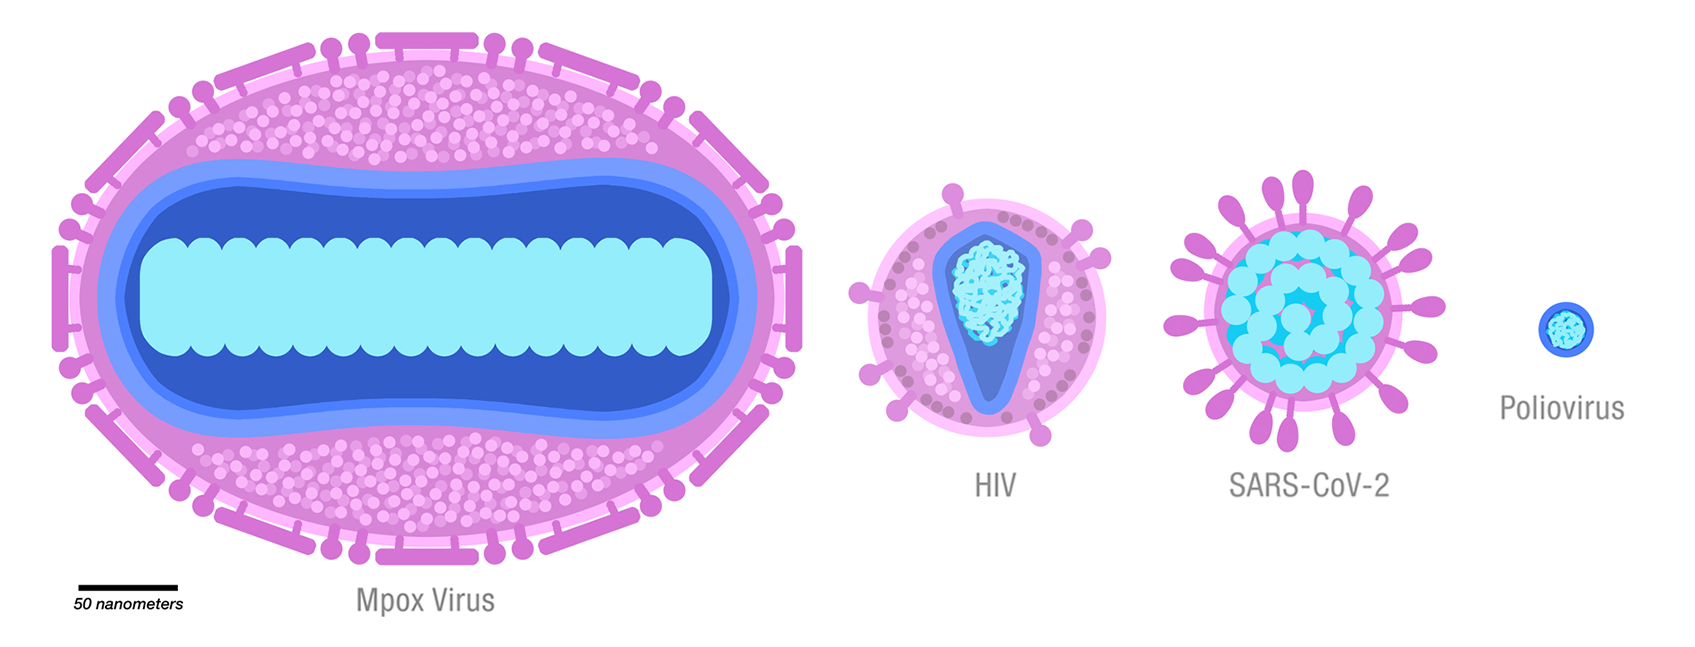 Schematic illustration of several viruses, drawn to scale. Membranes and membrane-bound proteins are in purple, capsids are in dark blue, and genomes and nucleoid-associated proteins are in turquoise.